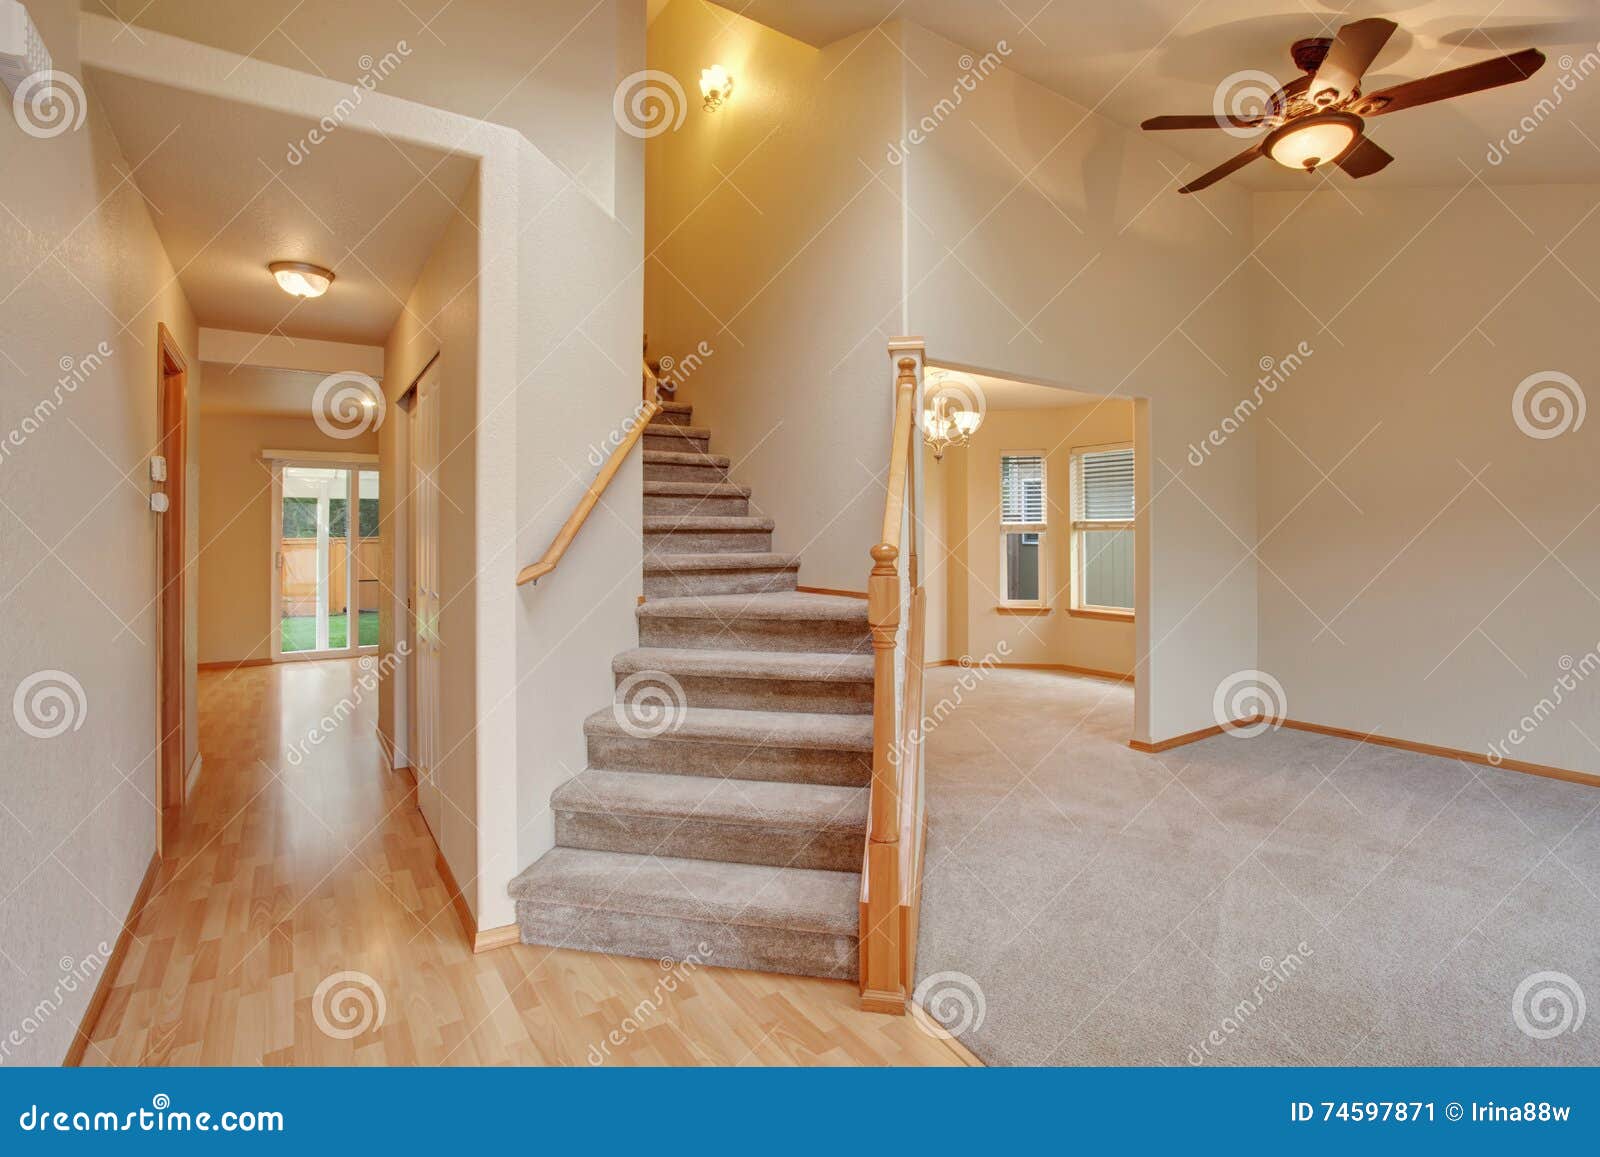 Empty Hallway Interior With Carpet Stairs View Stock Image